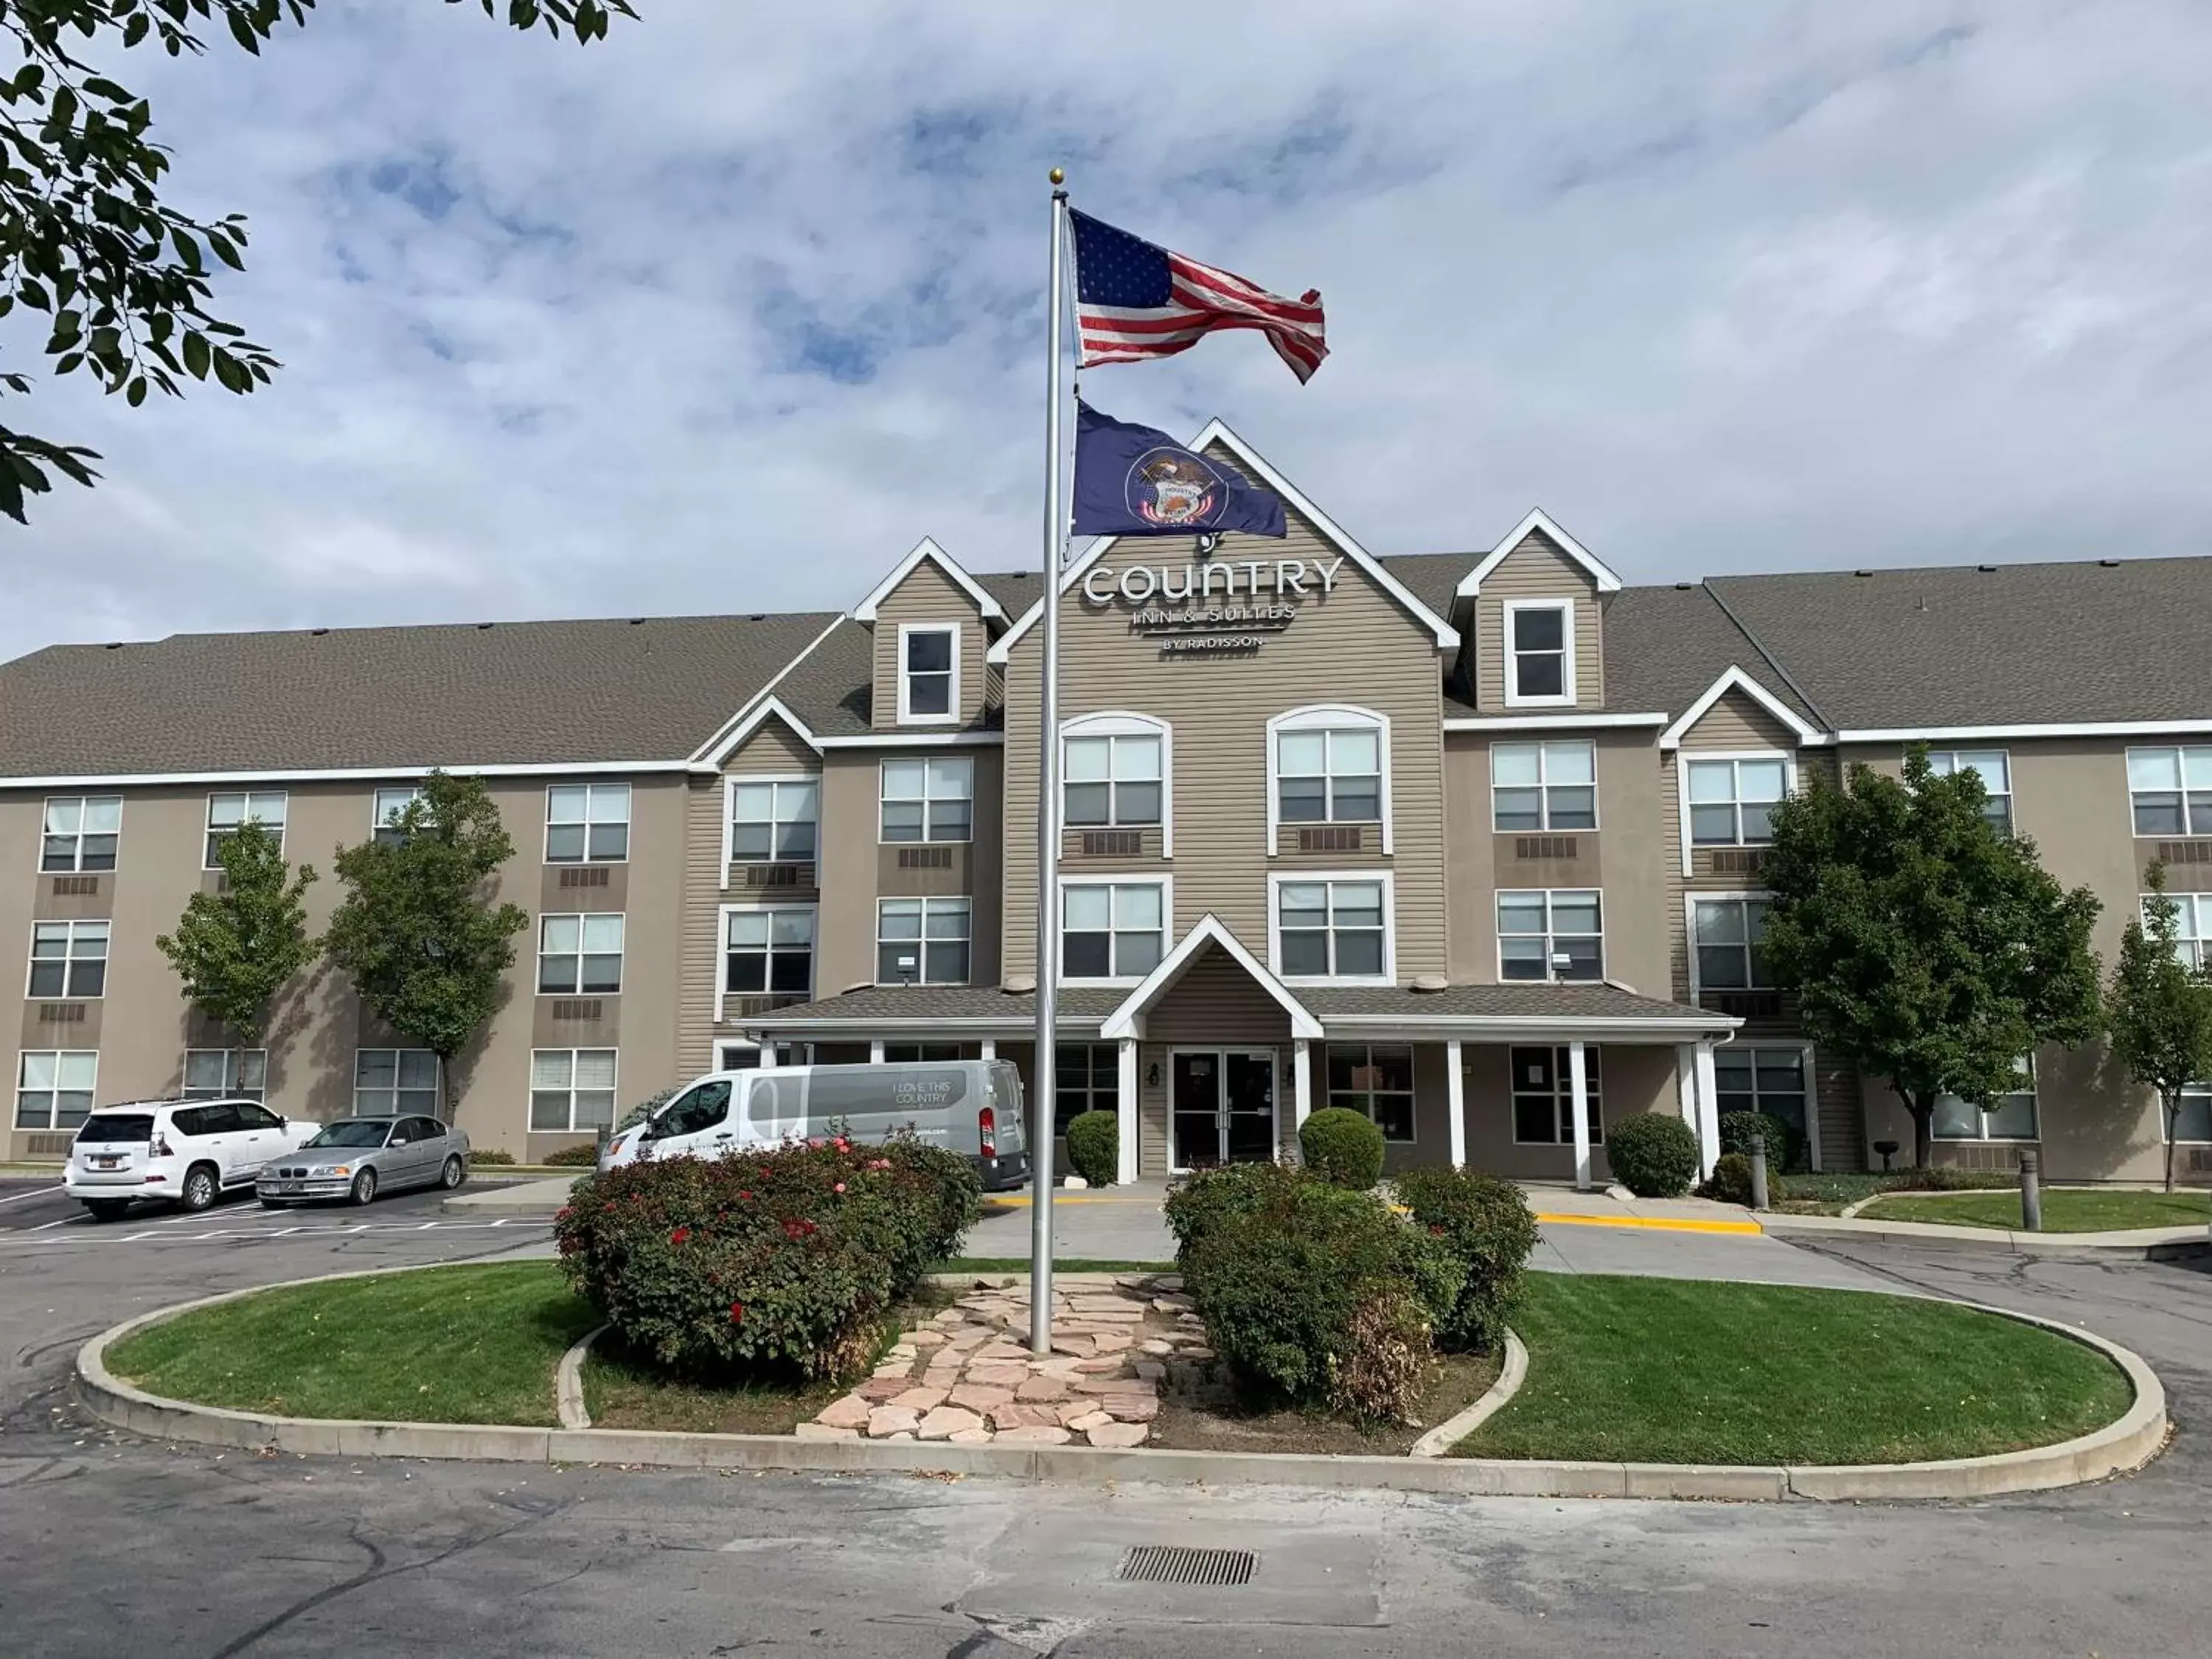 Property building in Country Inn & Suites by Radisson, West Valley City, UT